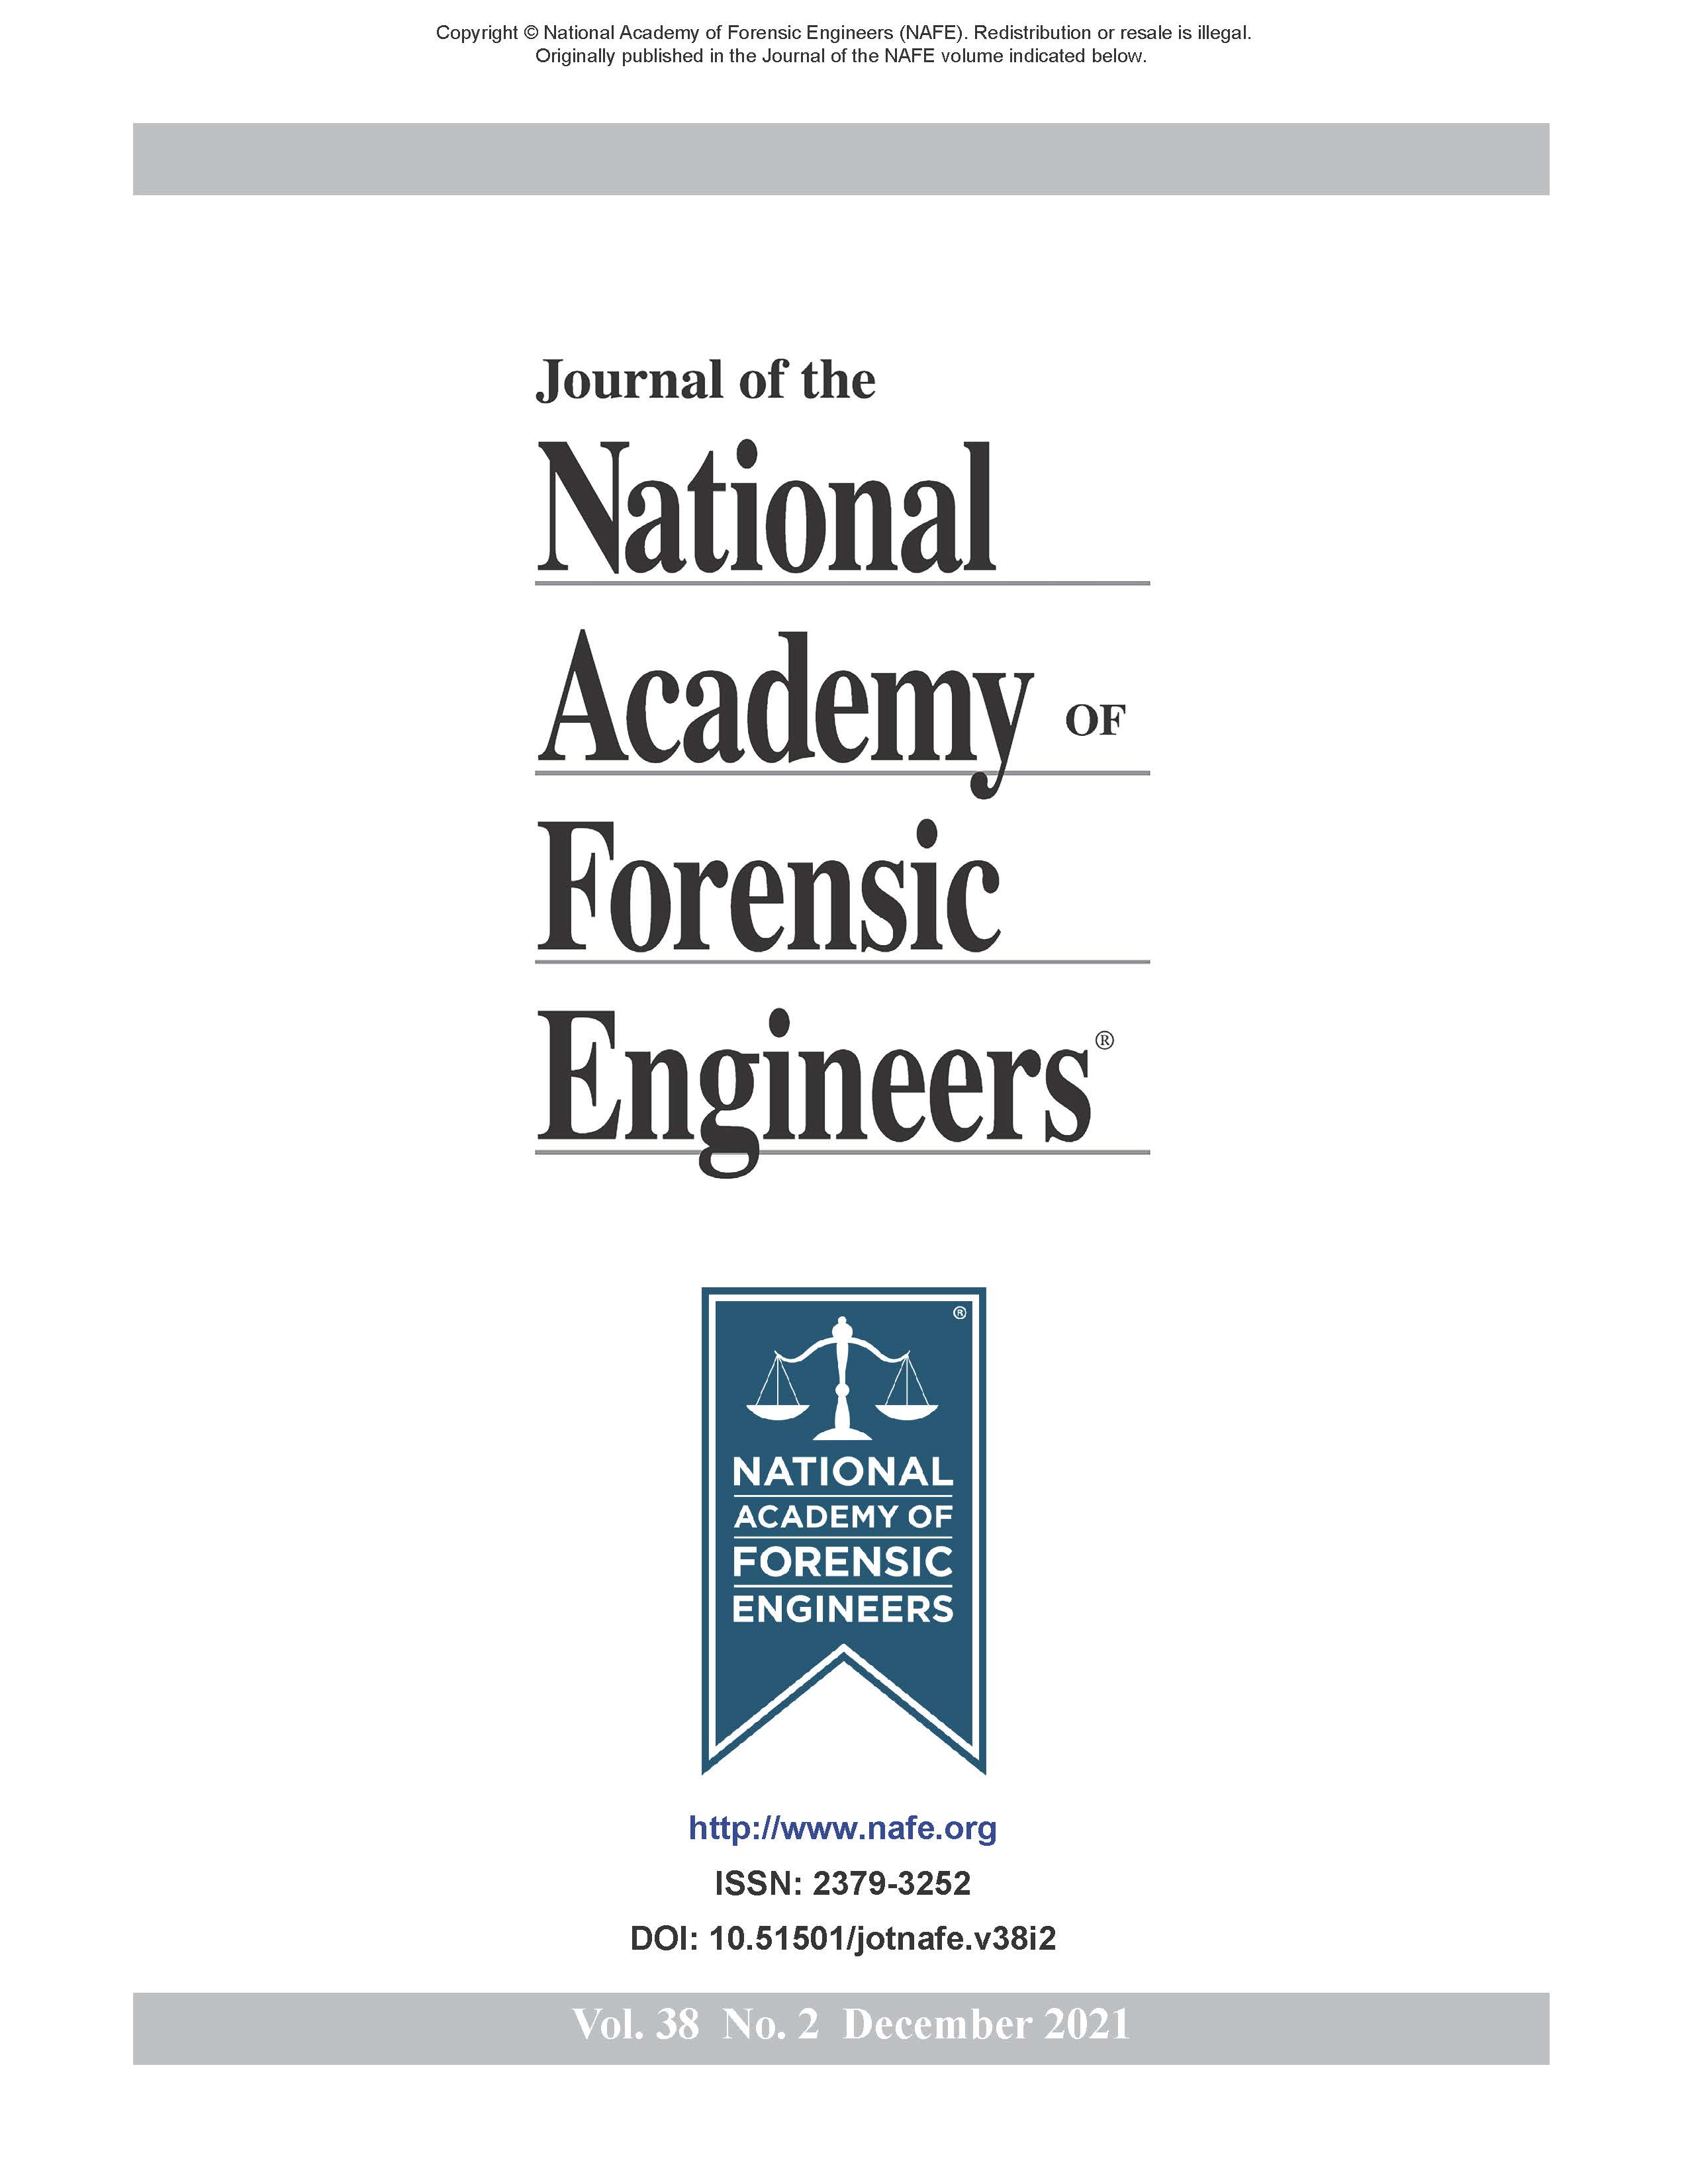 					View Vol. 38 No. 2 (2021): Journal of the National Academy of Forensic Engineers
				